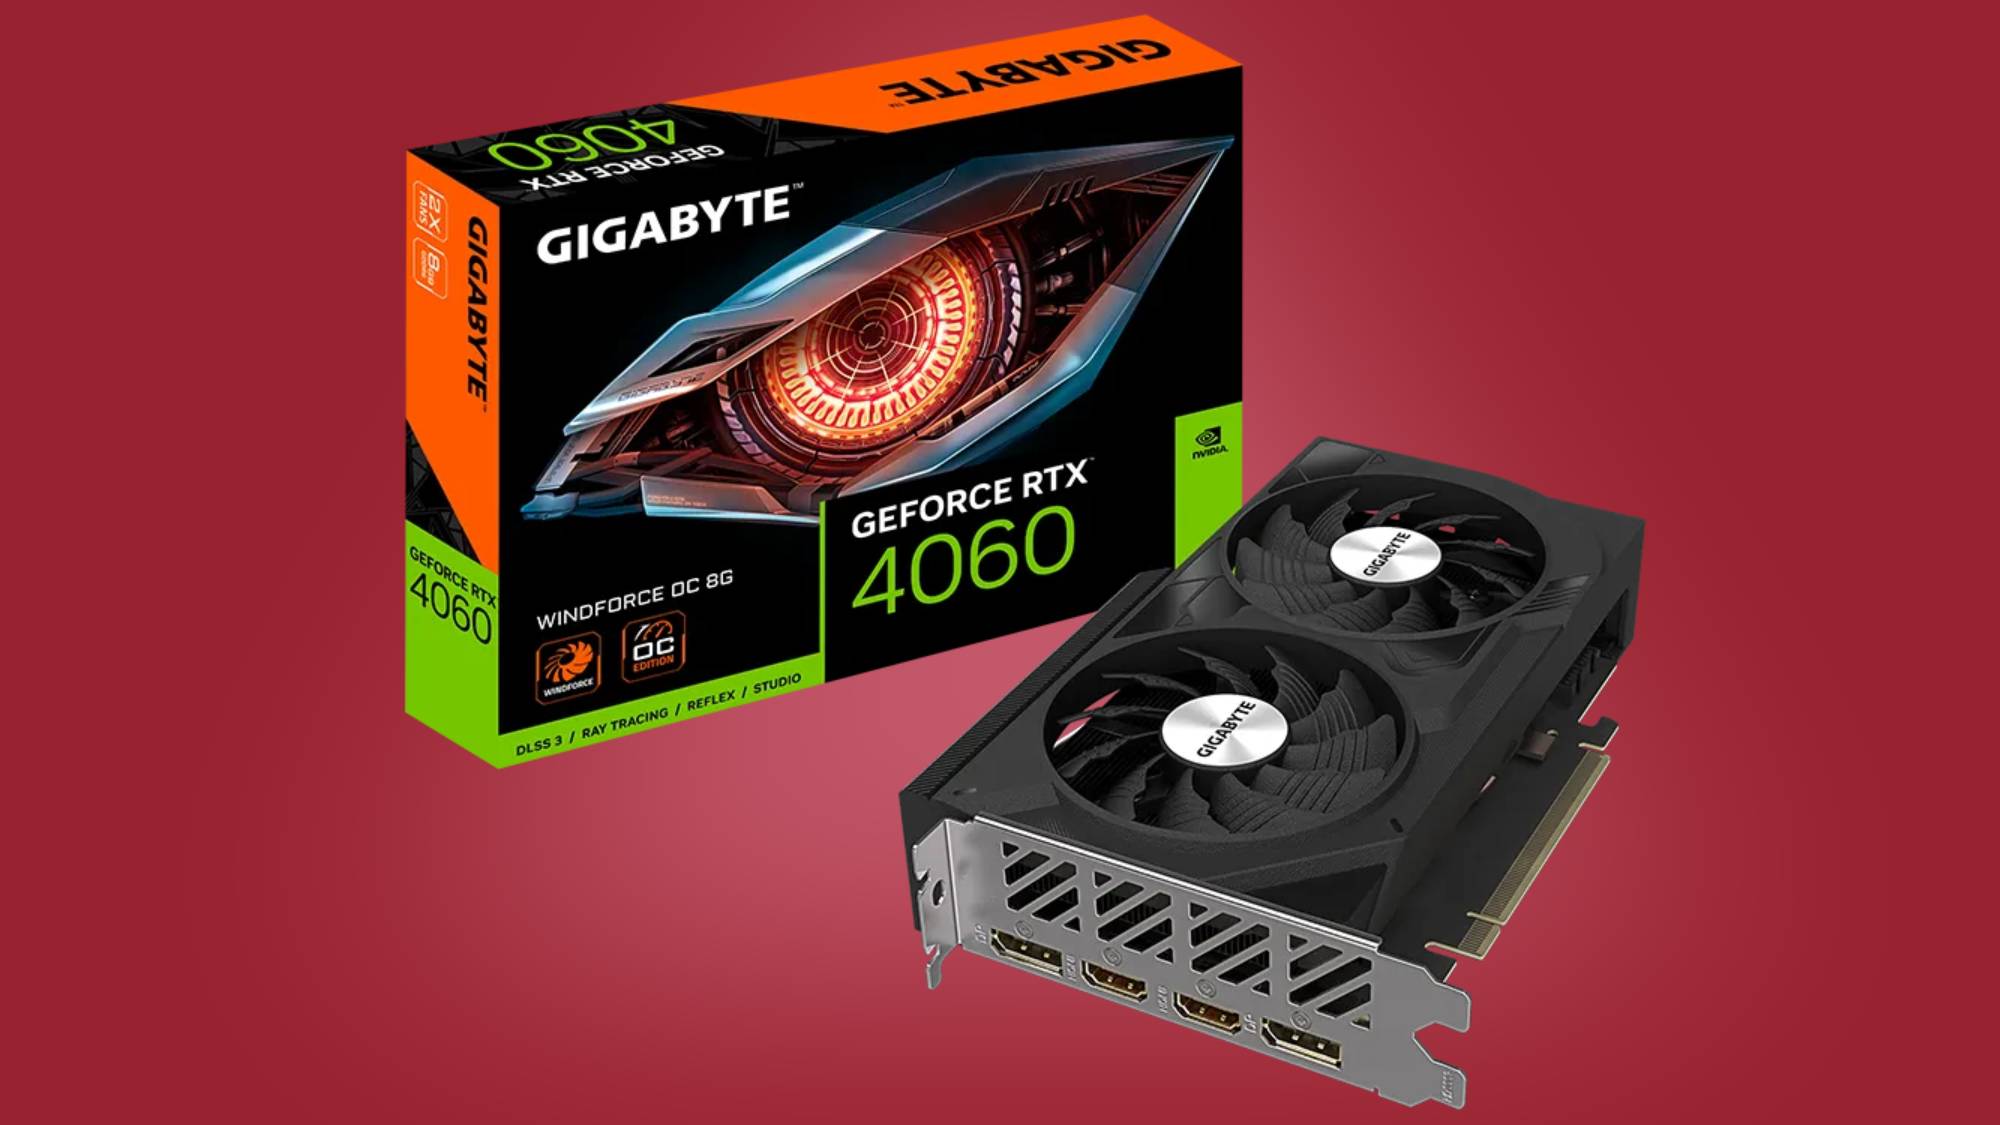 a graphics card and retail box